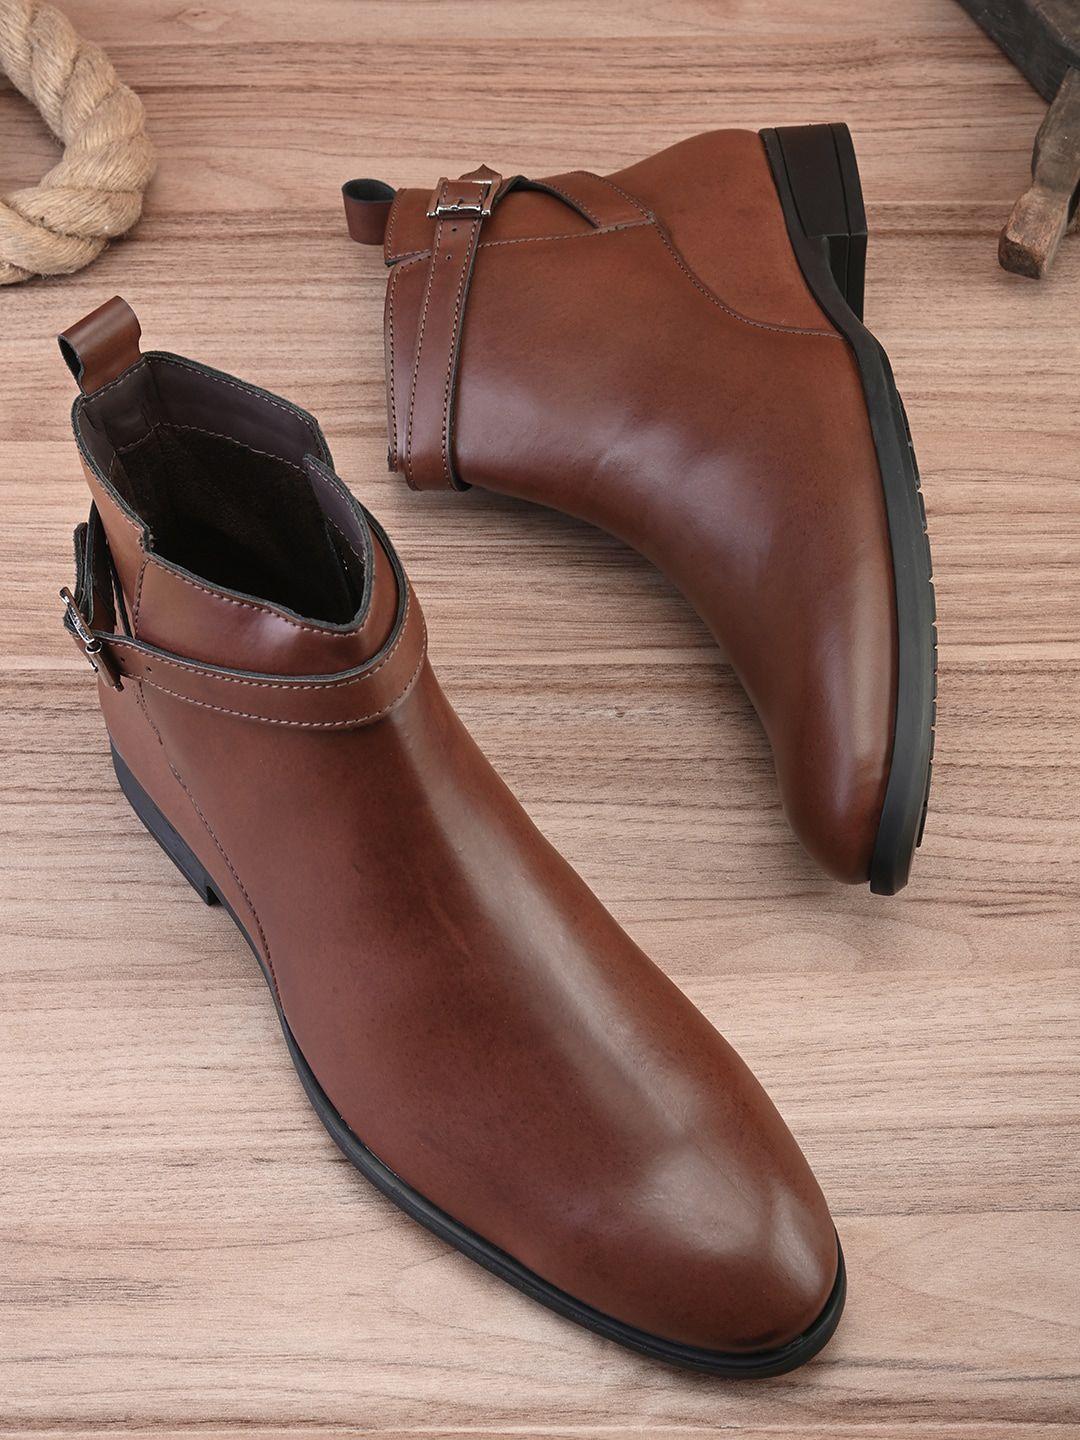 the roadster lifestyle co. brown faux leather monk straps boots